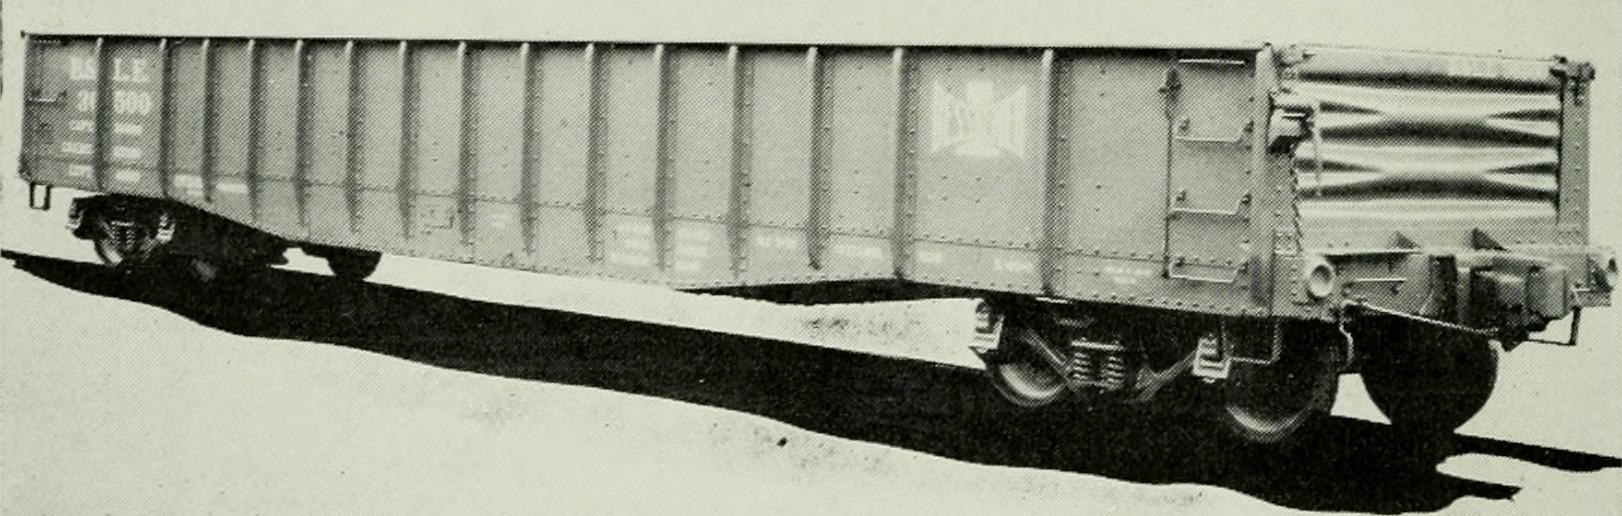 Image from page 93 of "Official proceedings" (1901)